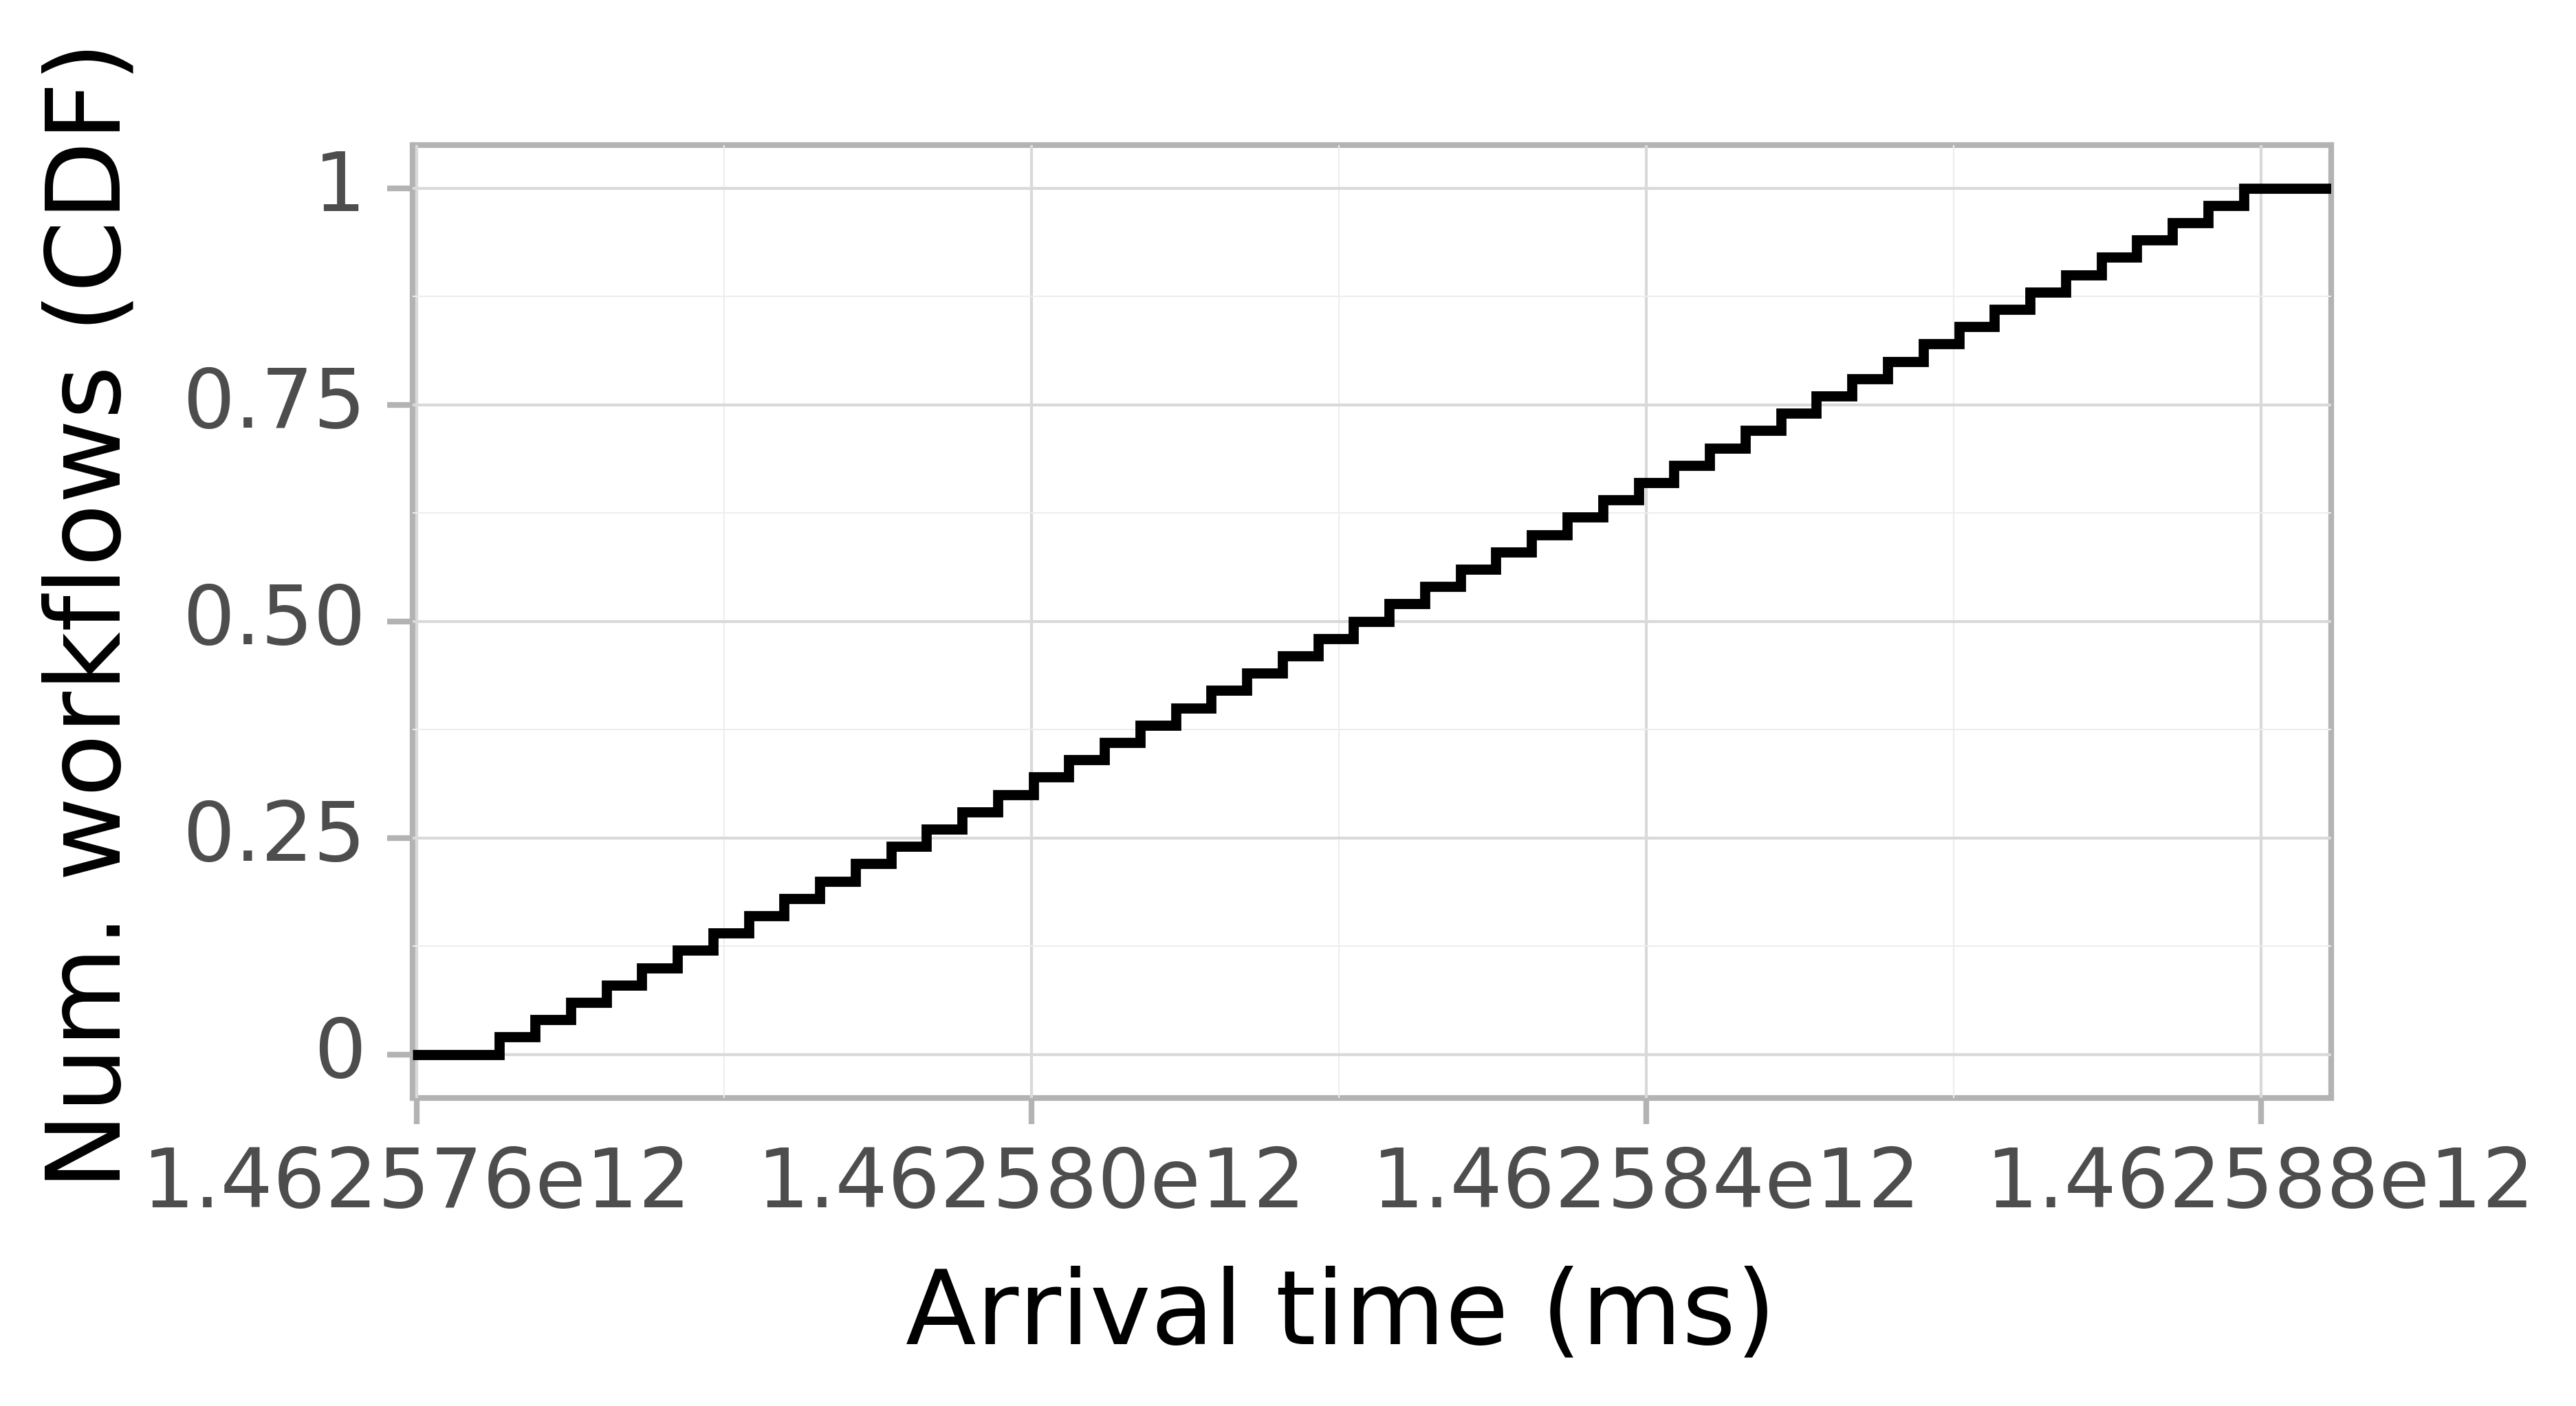 Job arrival CDF graph for the askalon-new_ee42 trace.